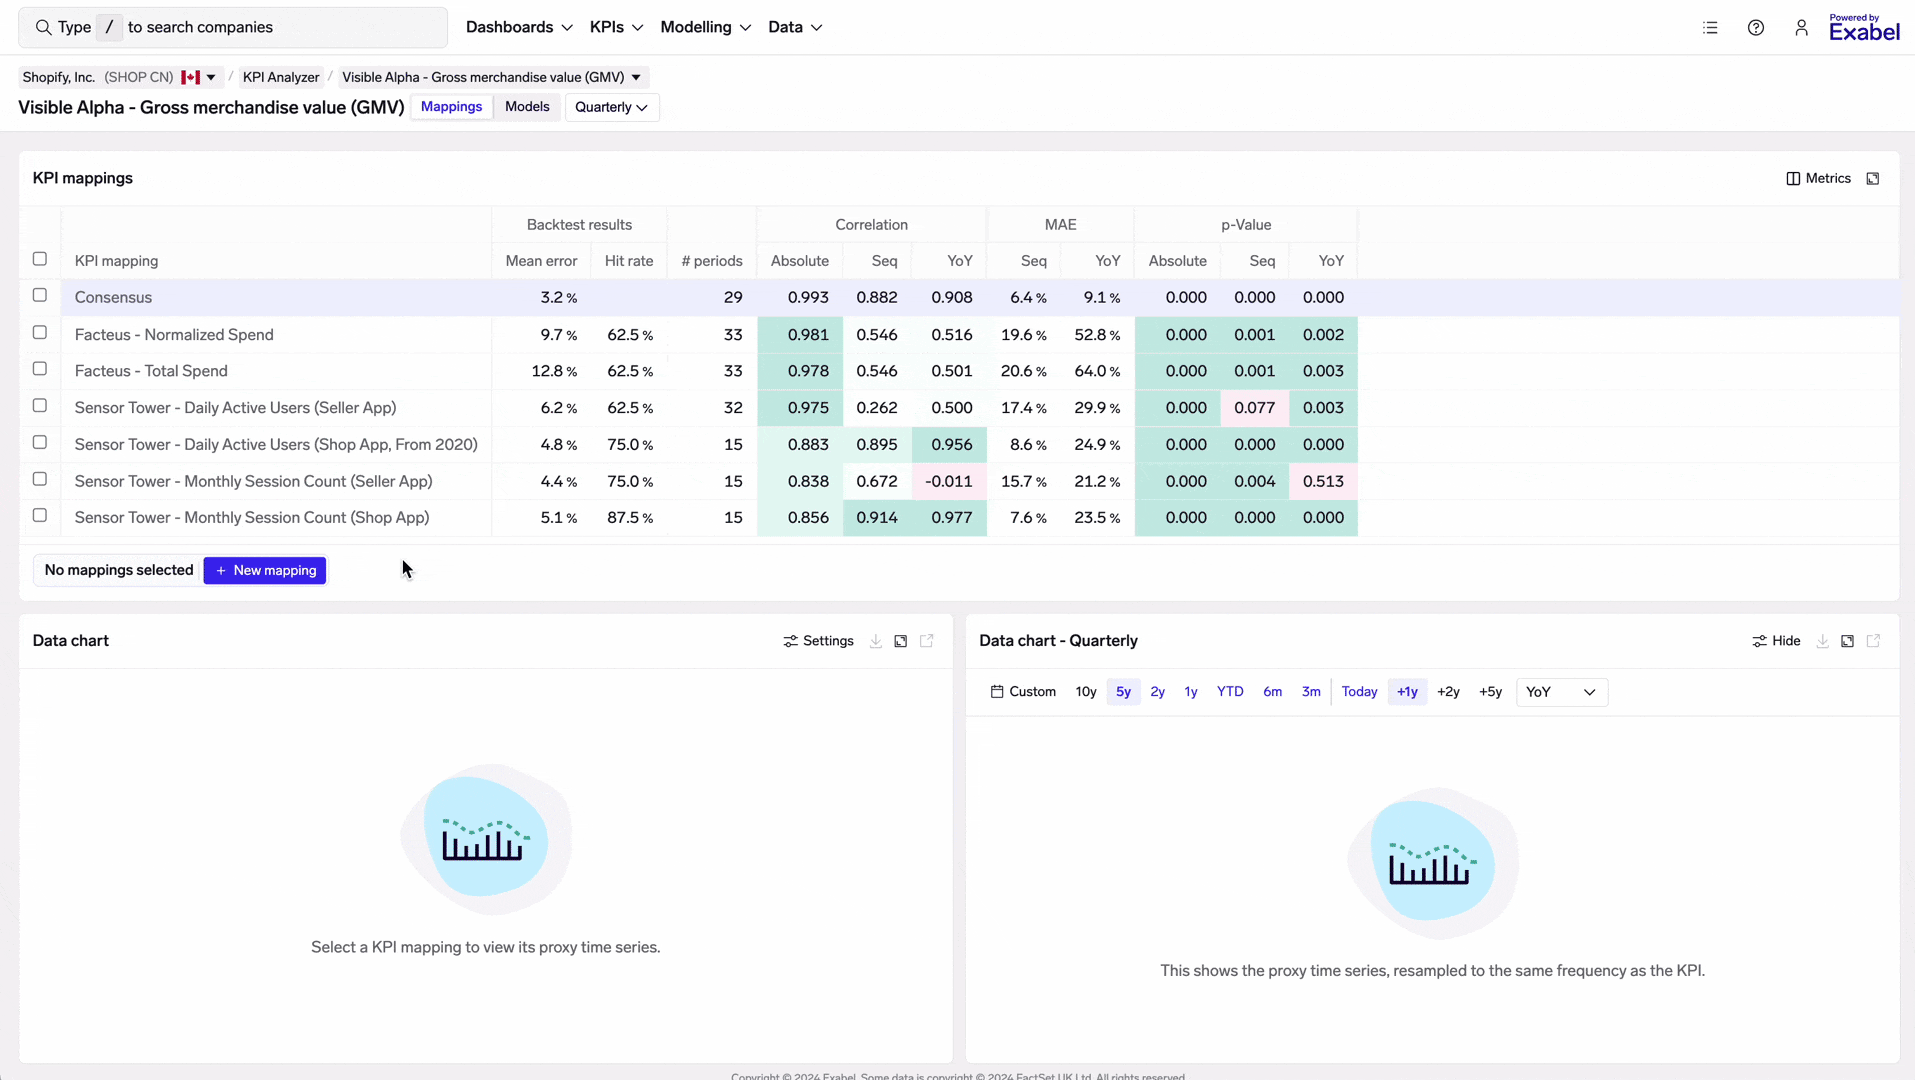 Testing a new KPI mapping for Shopify, comparing its performance vs existing mappings, and saving